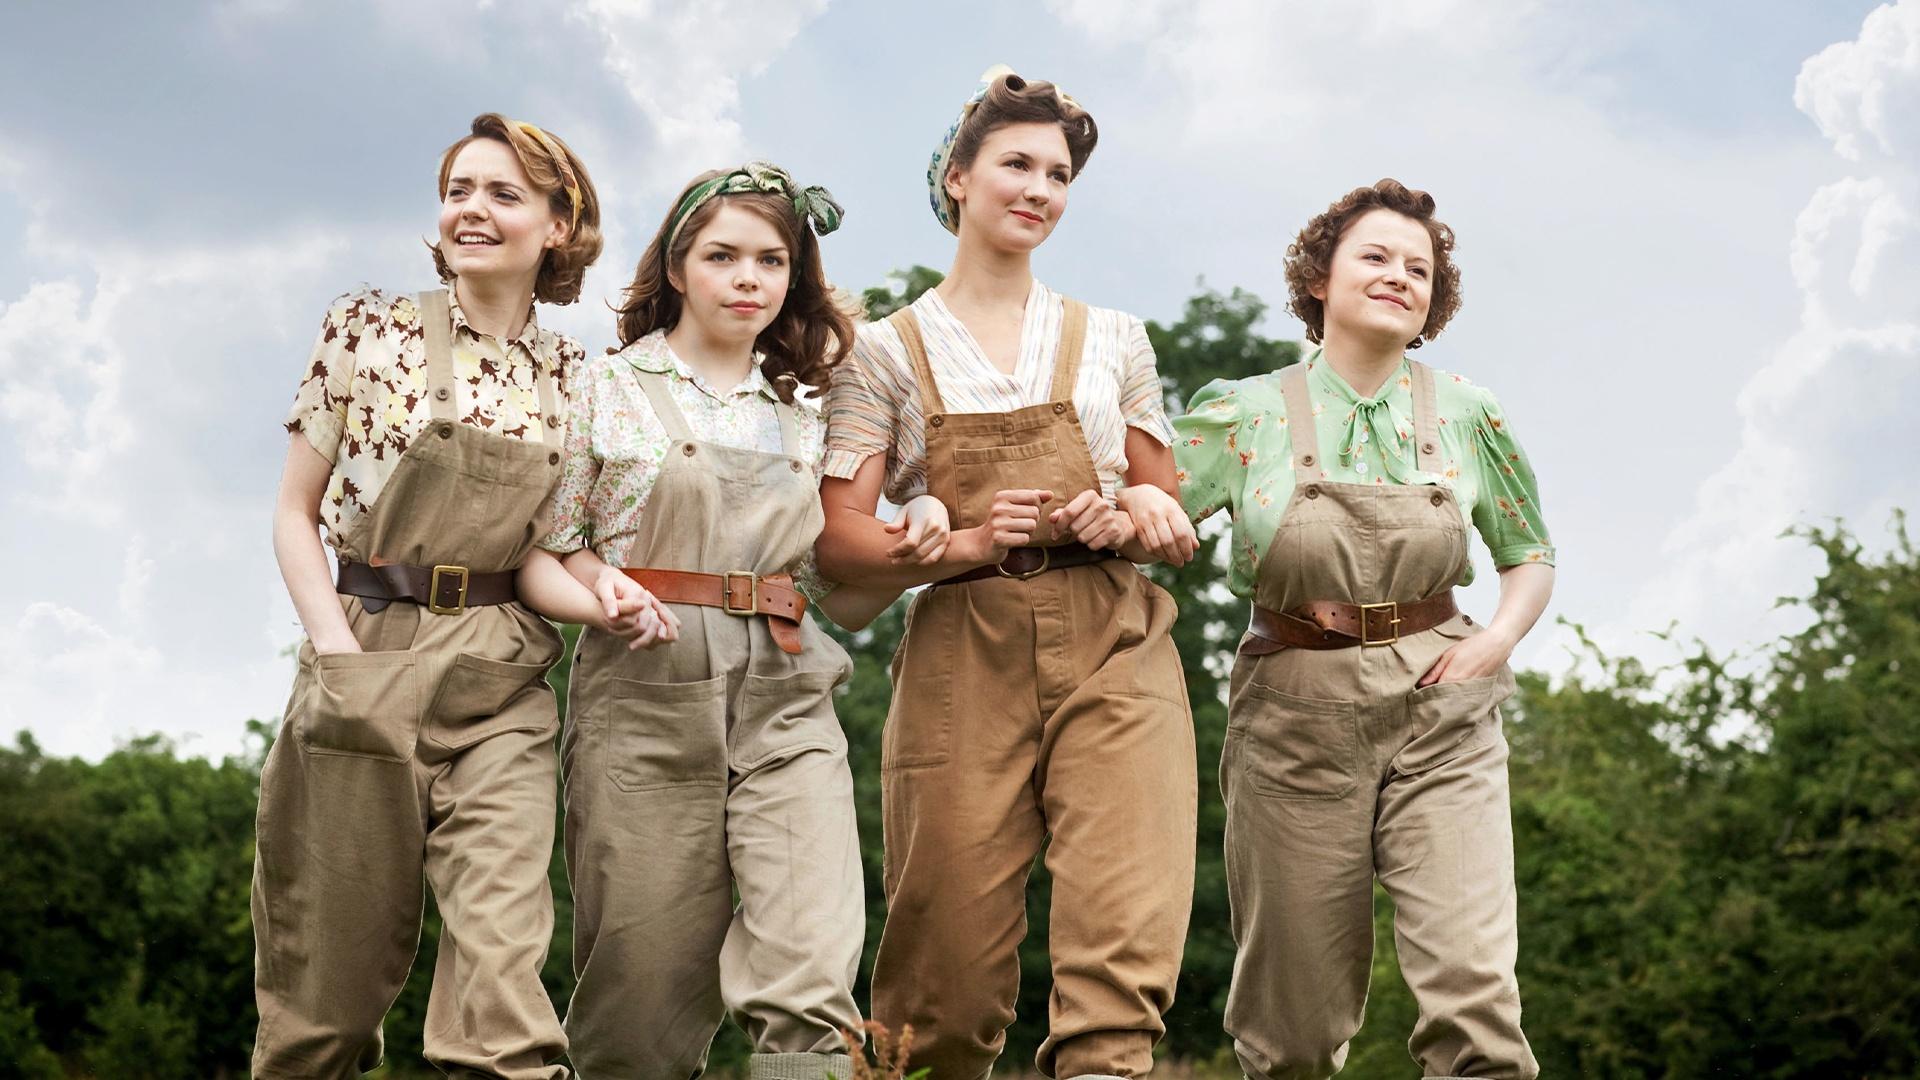 The cast of Land Girls.